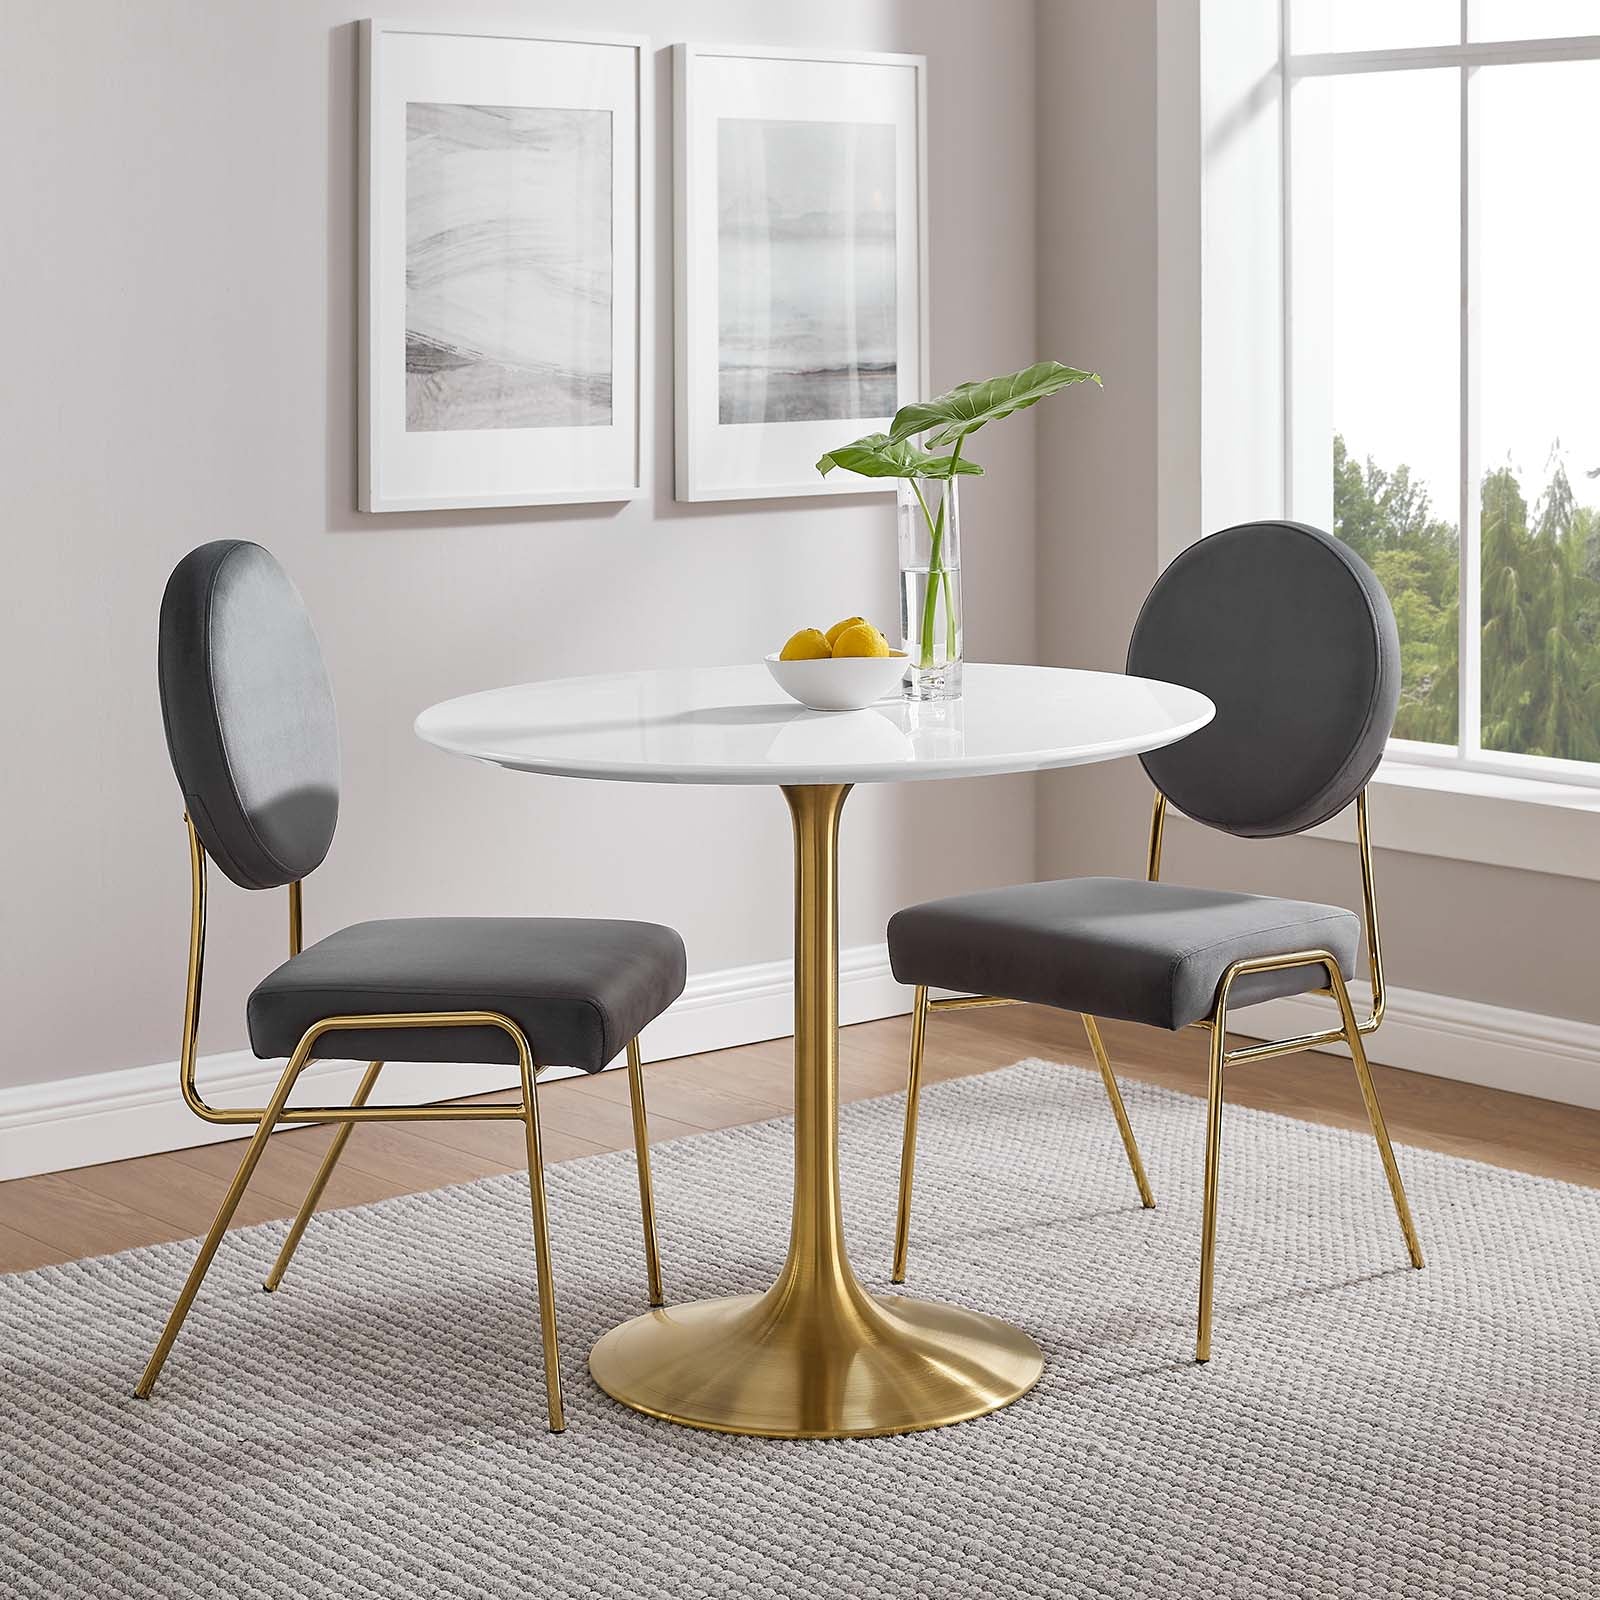 Lippa 36" Round Wood Dining Table - East Shore Modern Home Furnishings